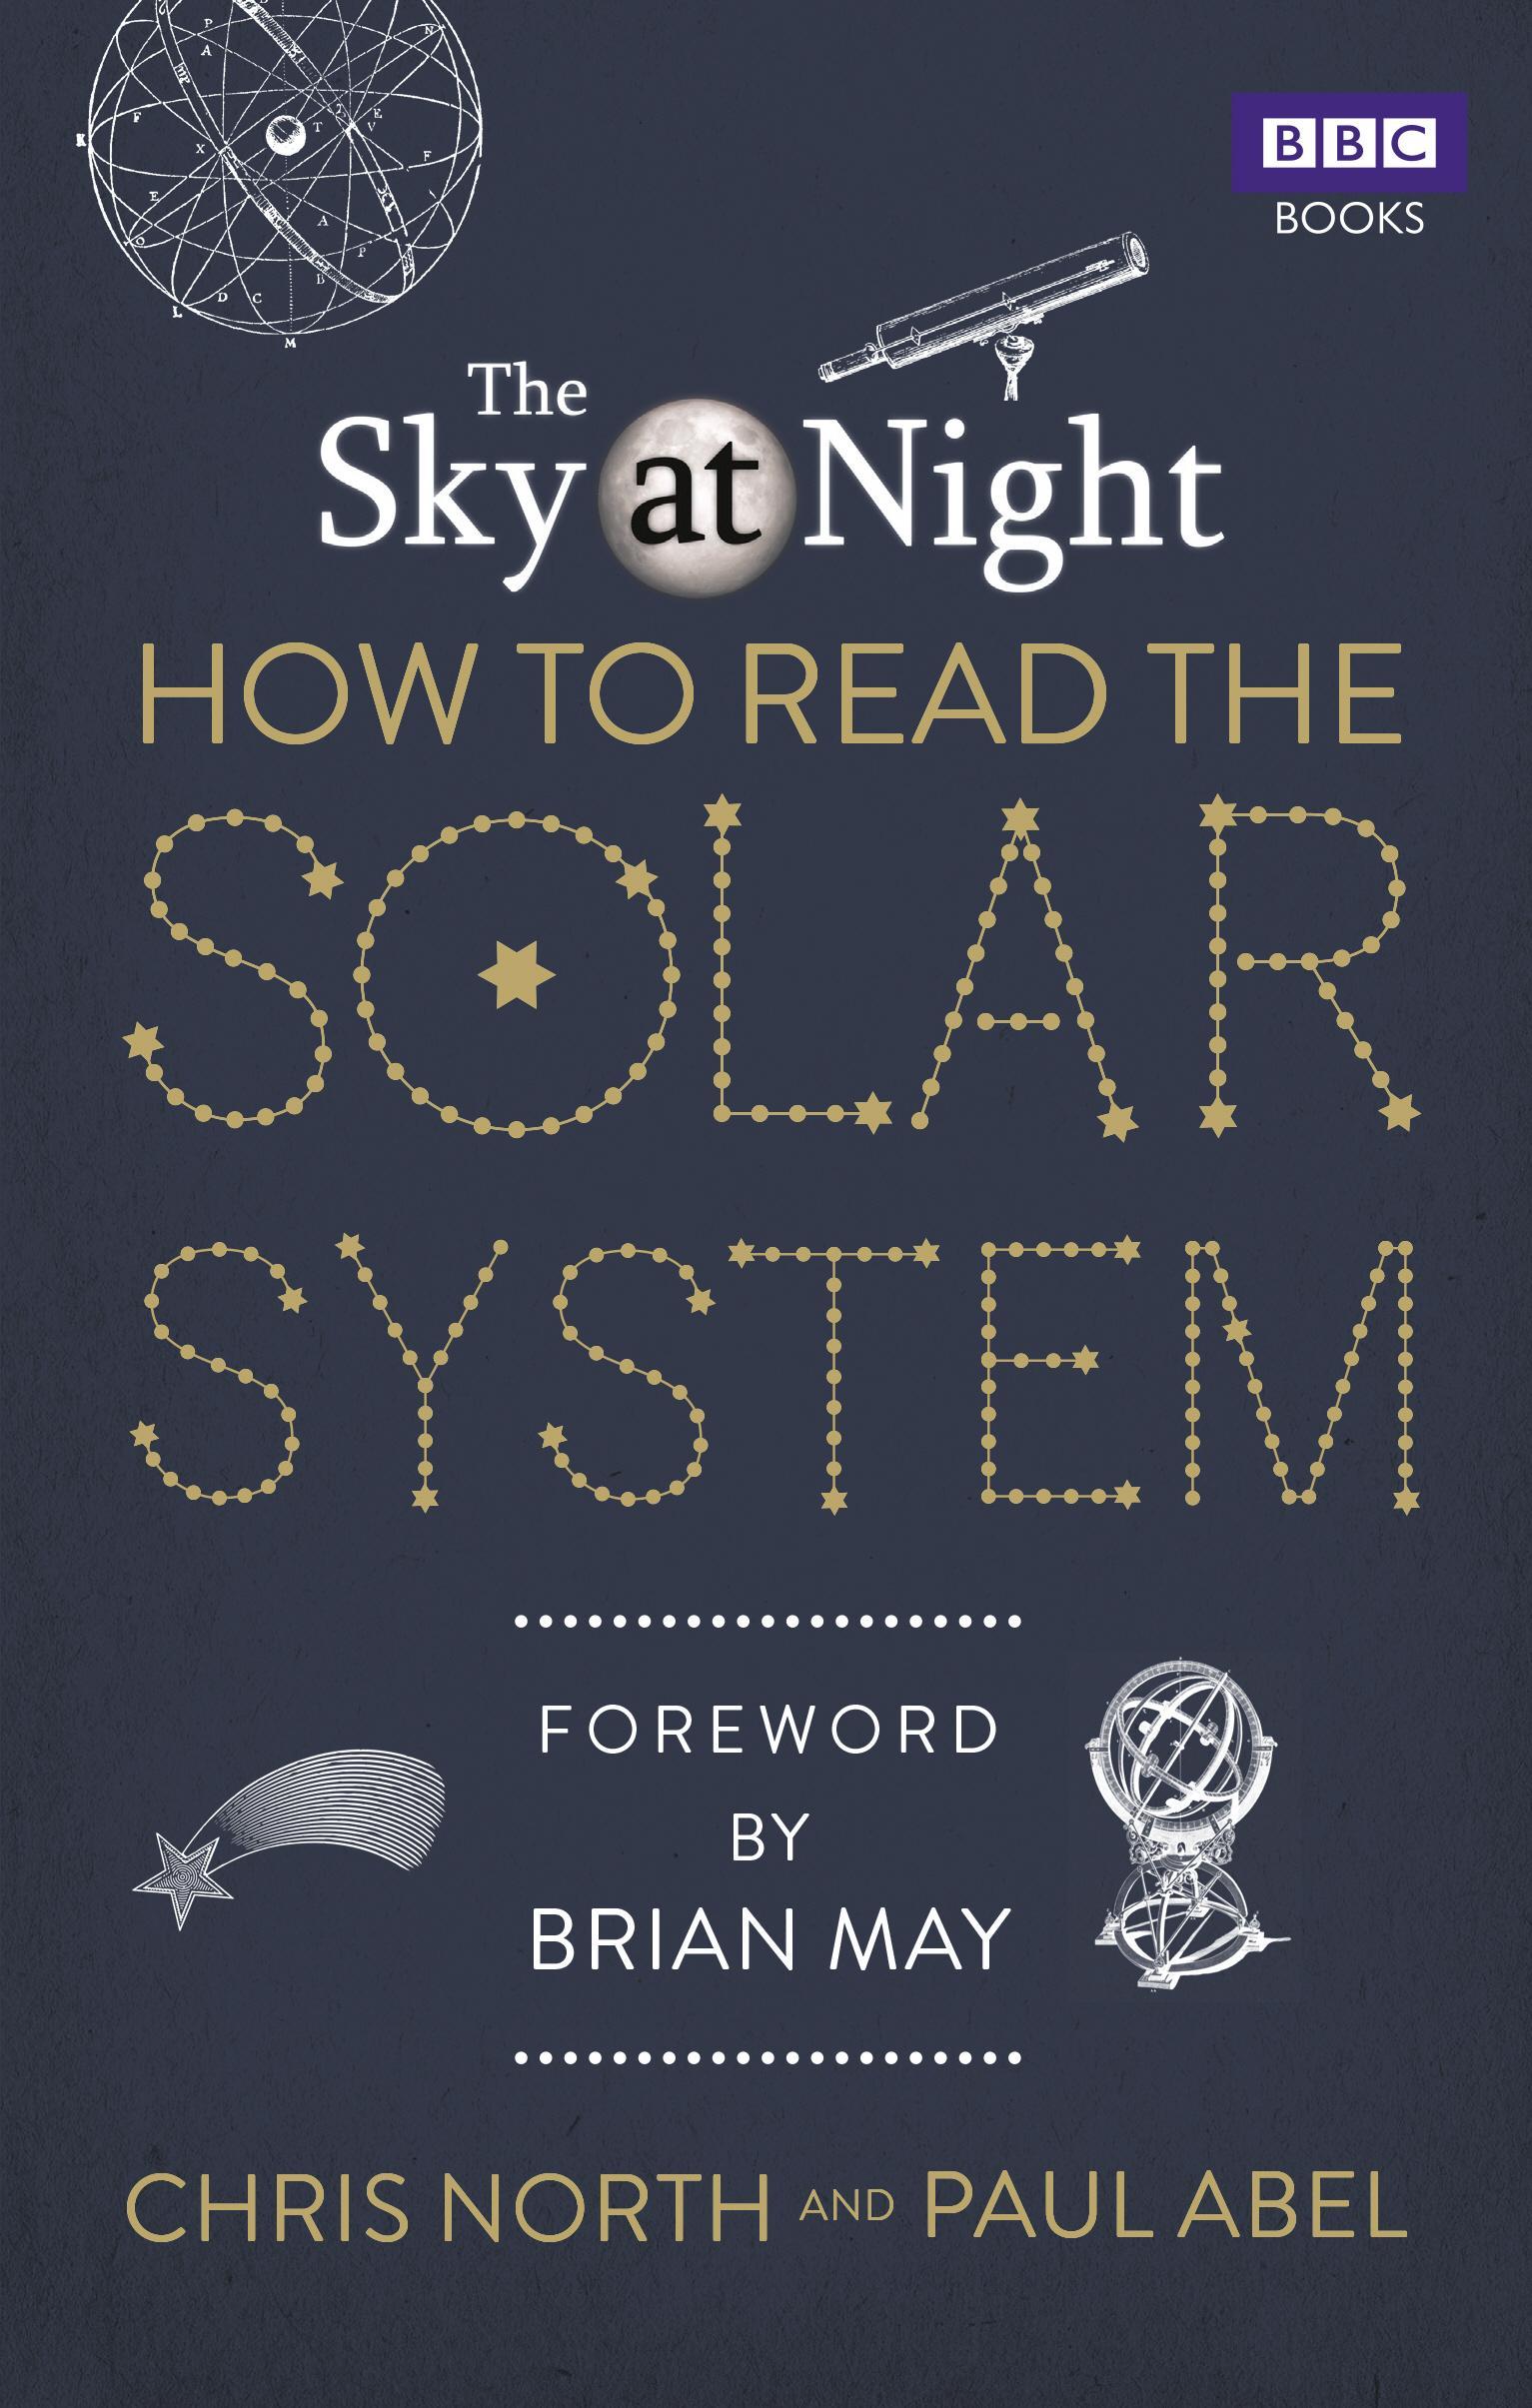 Sky at Night: How to Read the Solar System